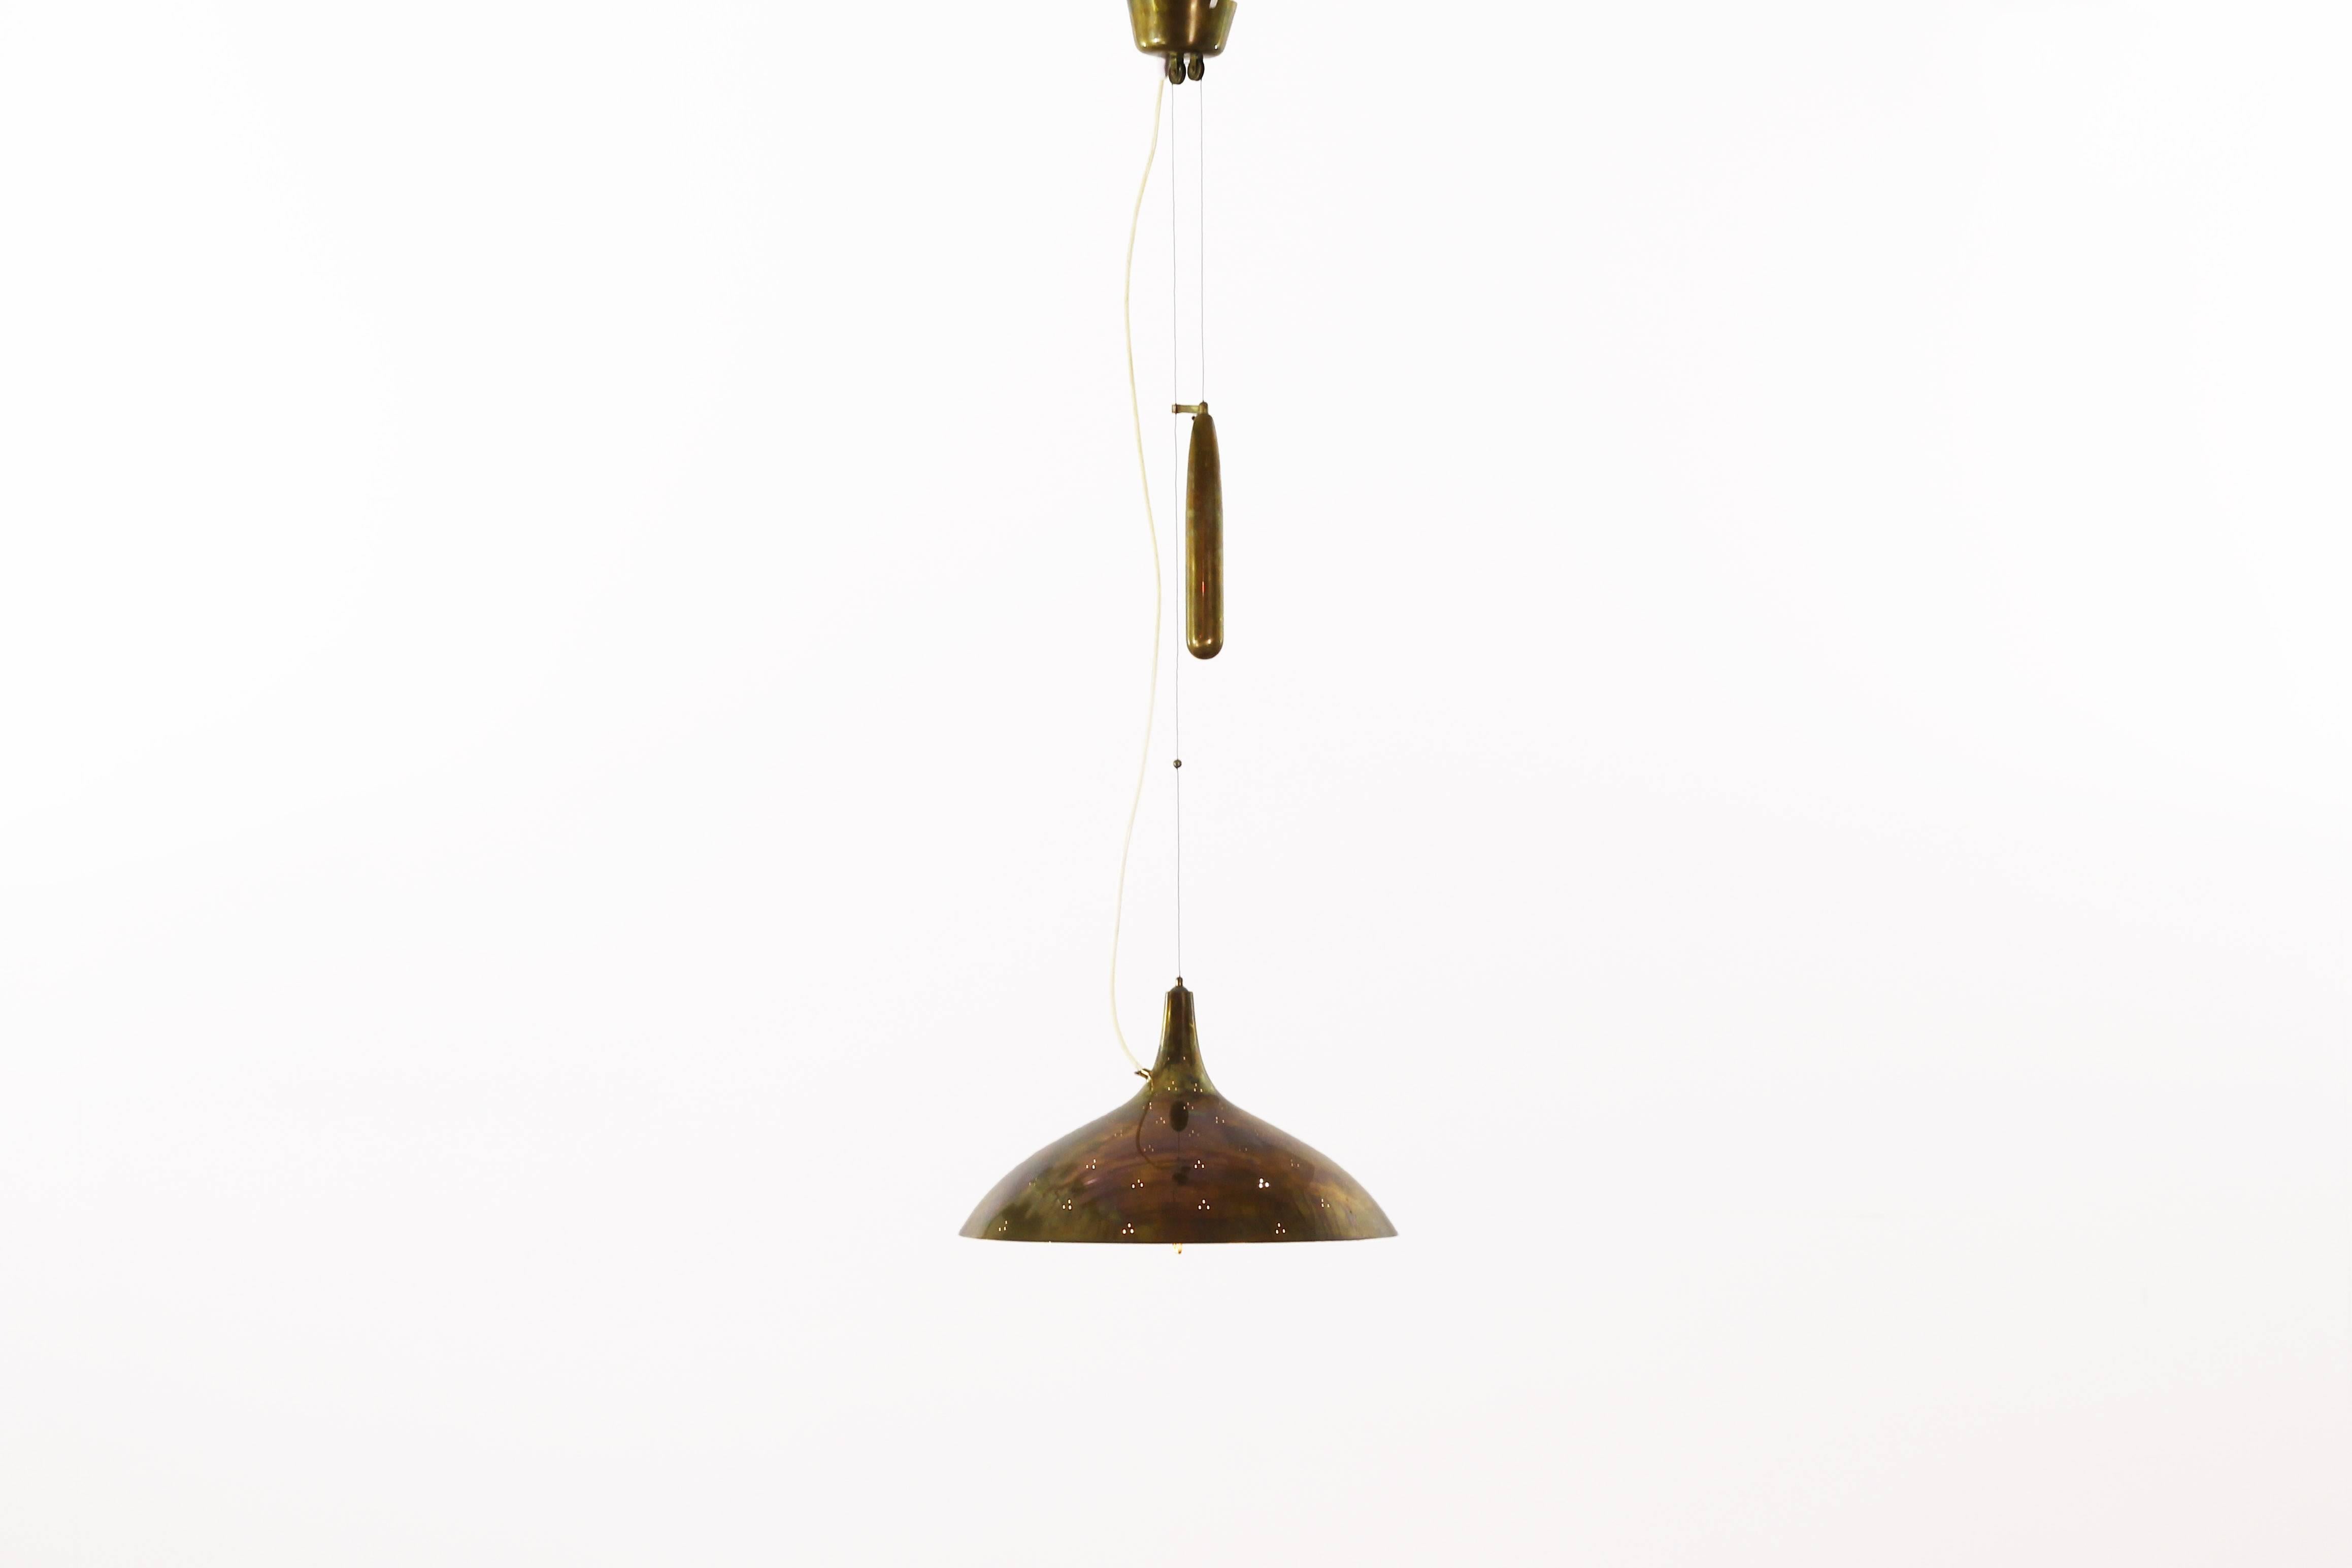 Very beautiful ceiling lamp designed by Paavo Tynell for Taito Oy, Finland in the late 1940s.
The lamp is made of brass and comes with a great patinated condition without any damages. The electric still works and is original.